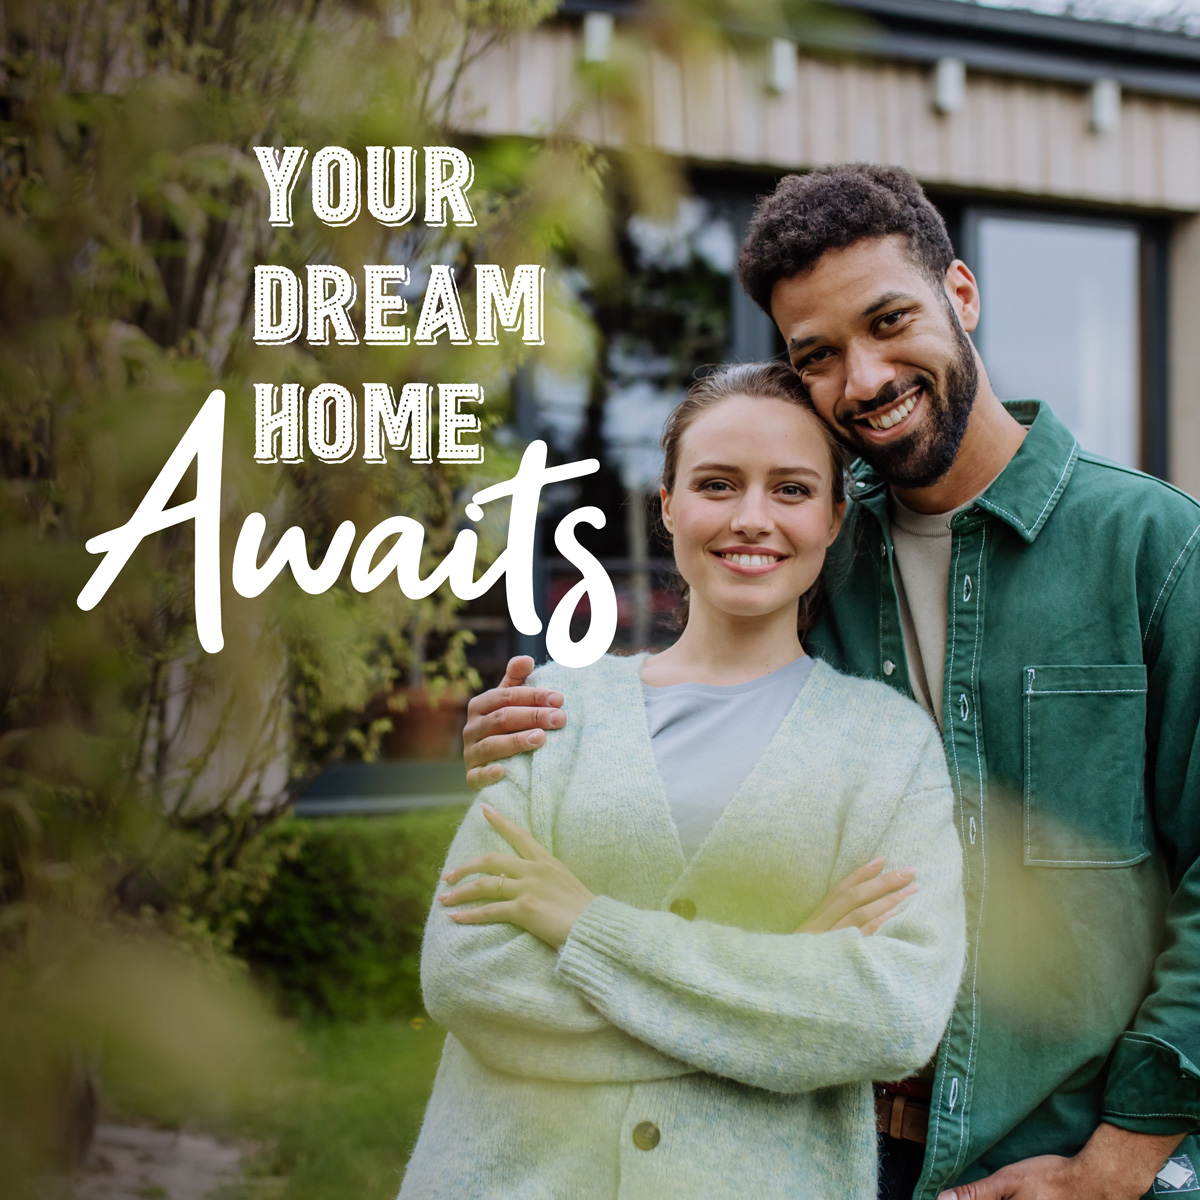 🏡 Tired of renting? Ready to make your dream of homeownership a reality? 🙌 Don't fret, you might be closer than you think! 💪 Take charge of your future and give me a call today to see how I can help you turn that dream into a reality! 📞 #Homeownership #DreamHome #CallMeNow